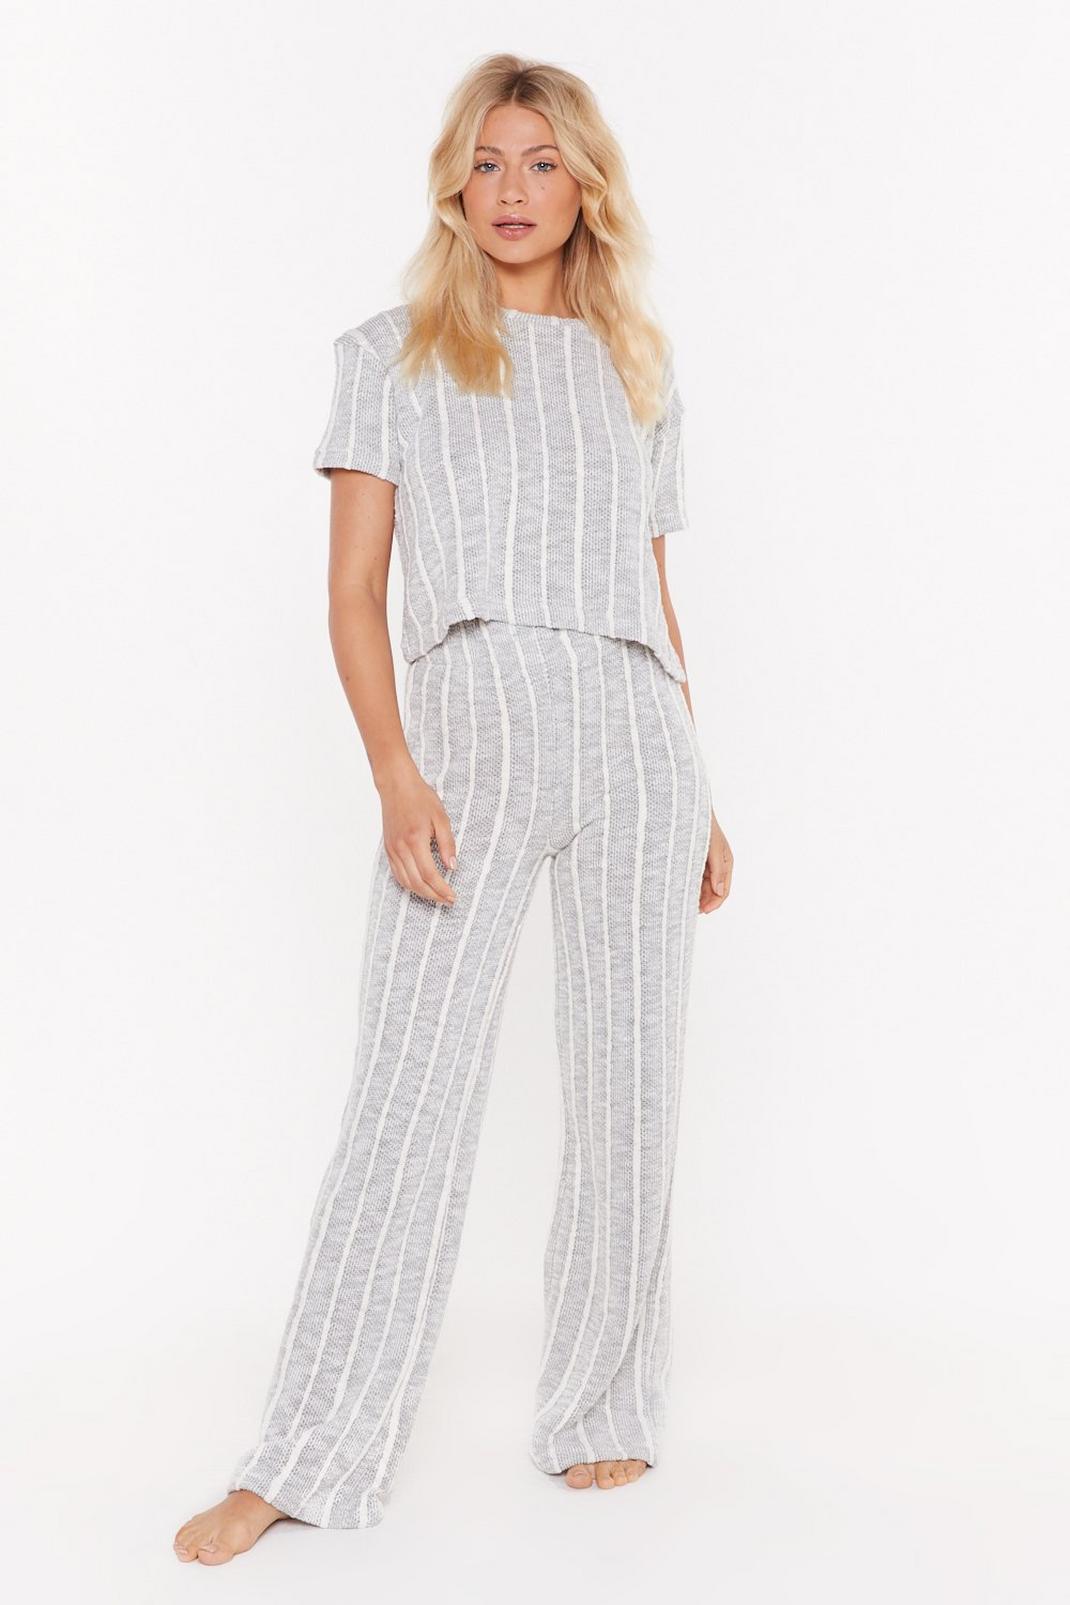 Be Done With Knit Striped Top and Pants Lounge Set image number 1